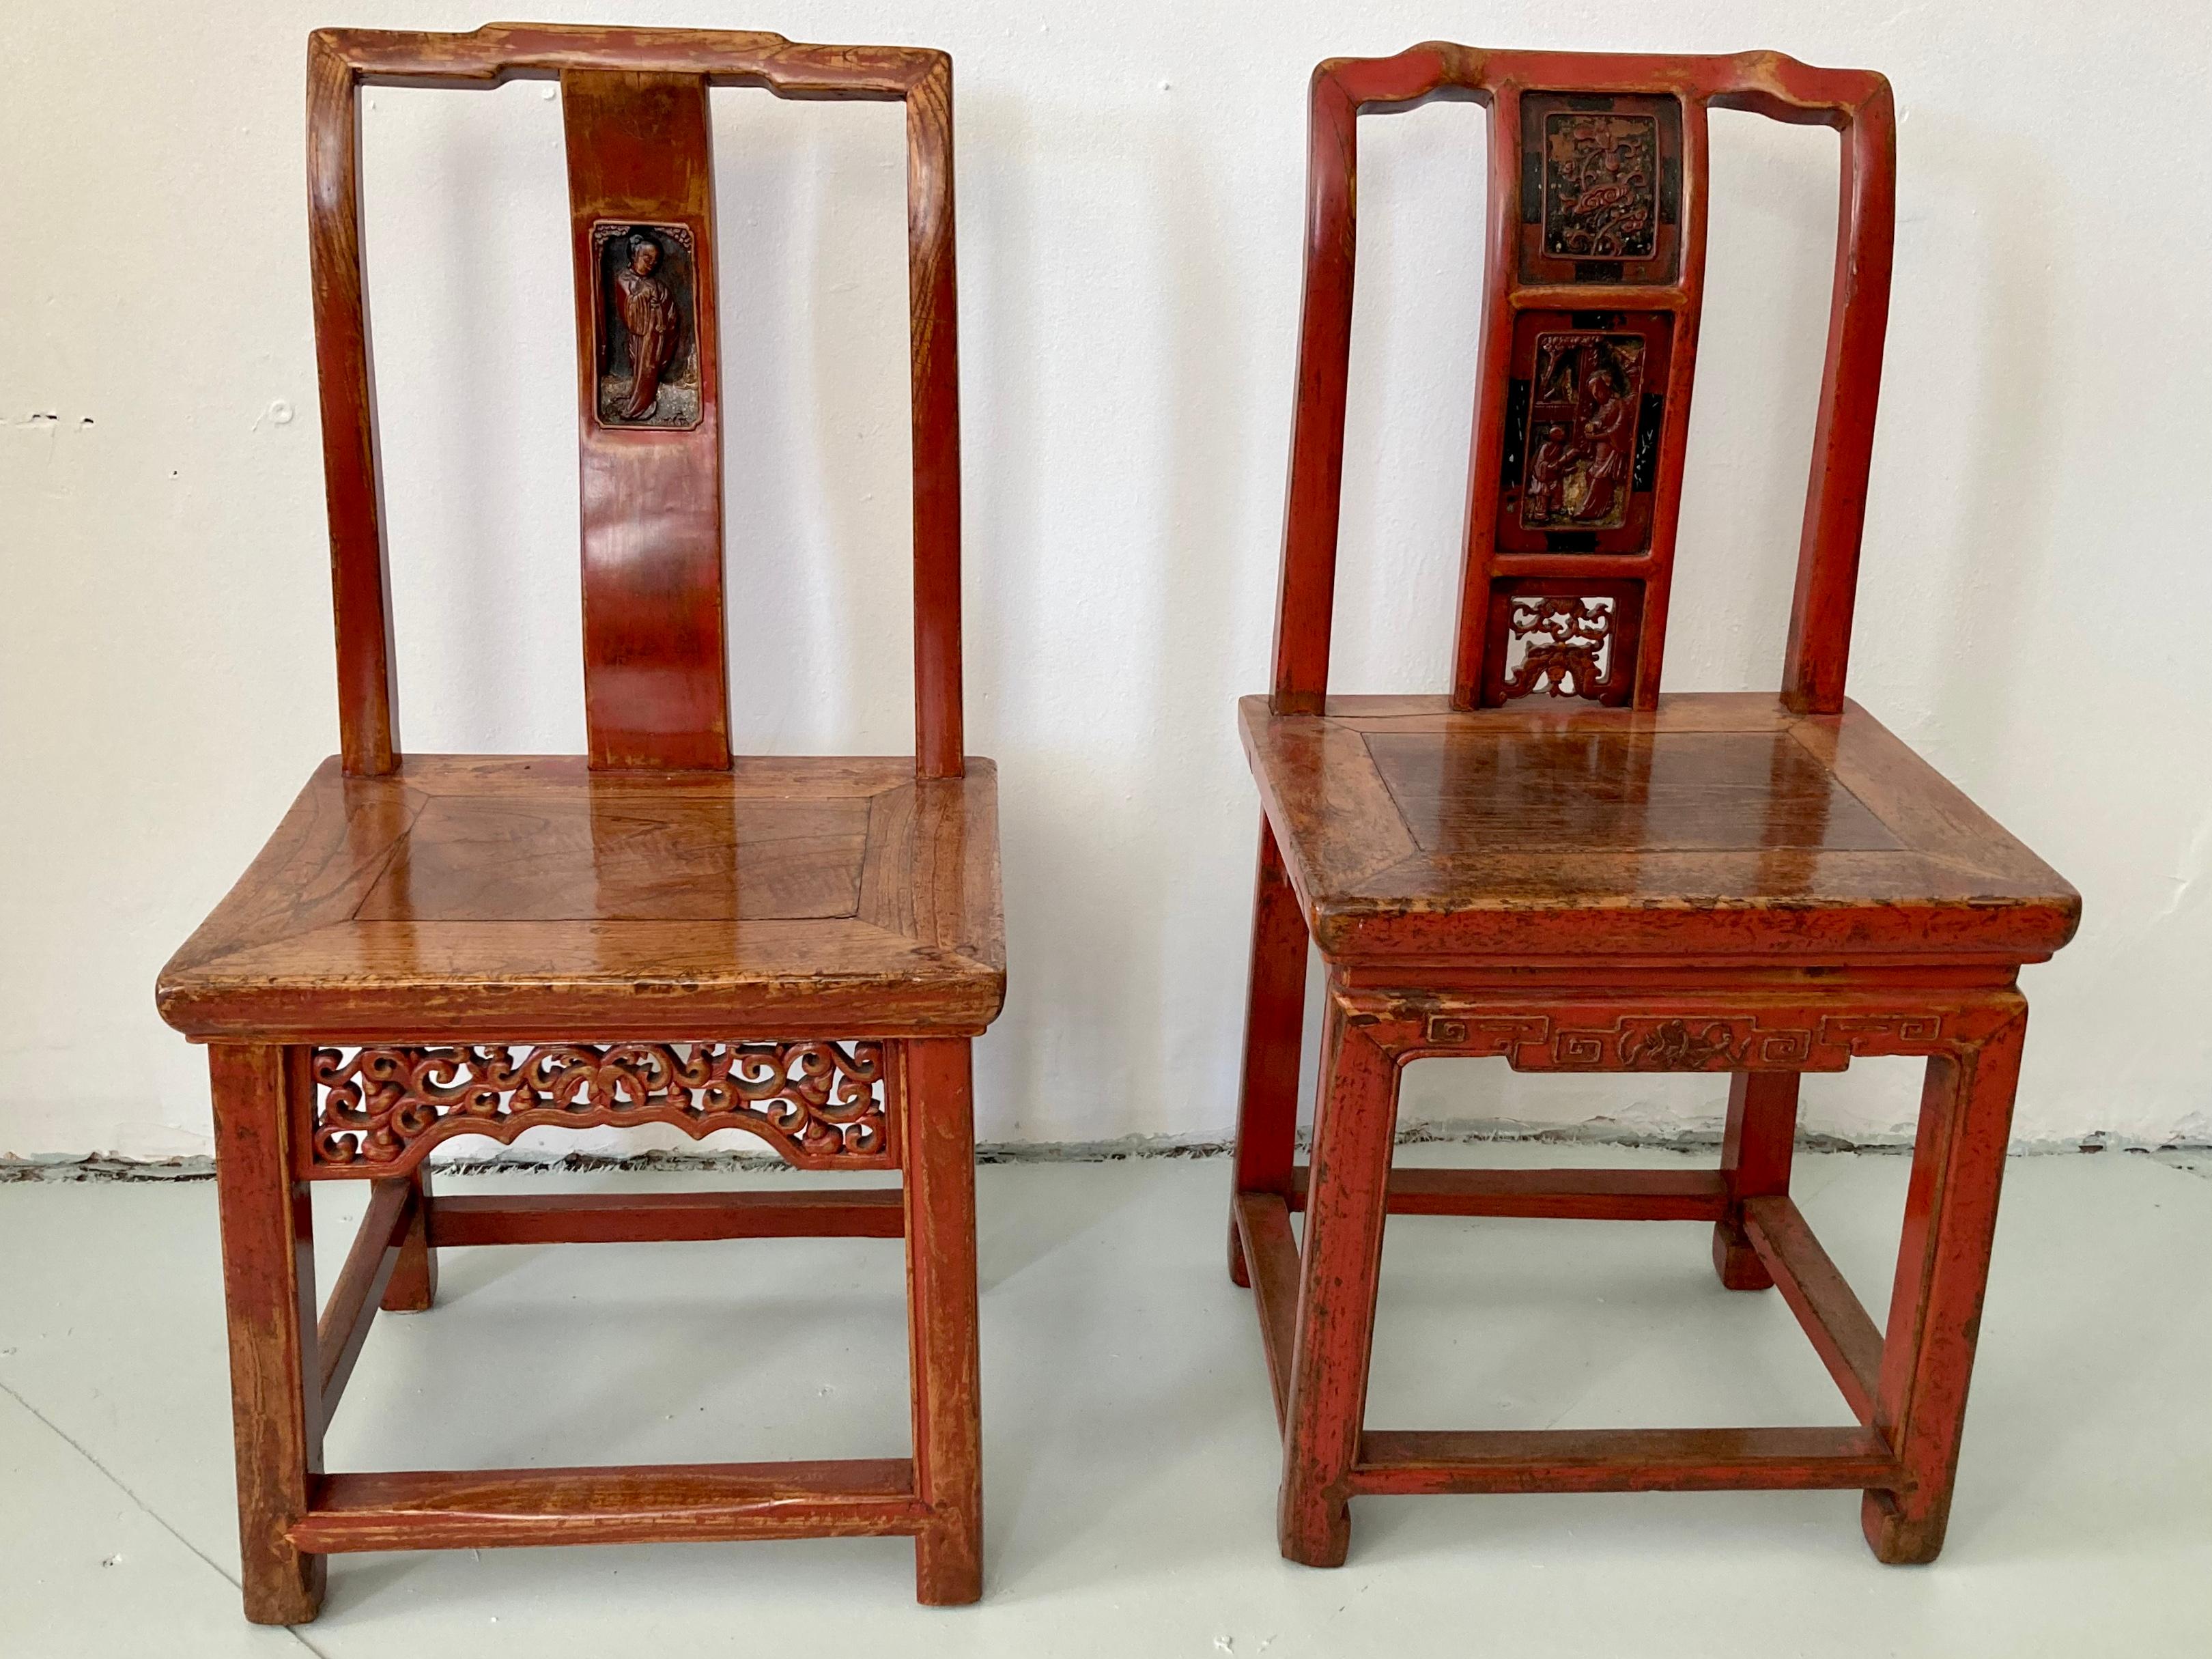 Pair of red Chinese wood side chairs. Great unique carving details on each chair. Not a true pair but are being sold as a pair and are a similar scale color and finish . Just a very fun cute pair.